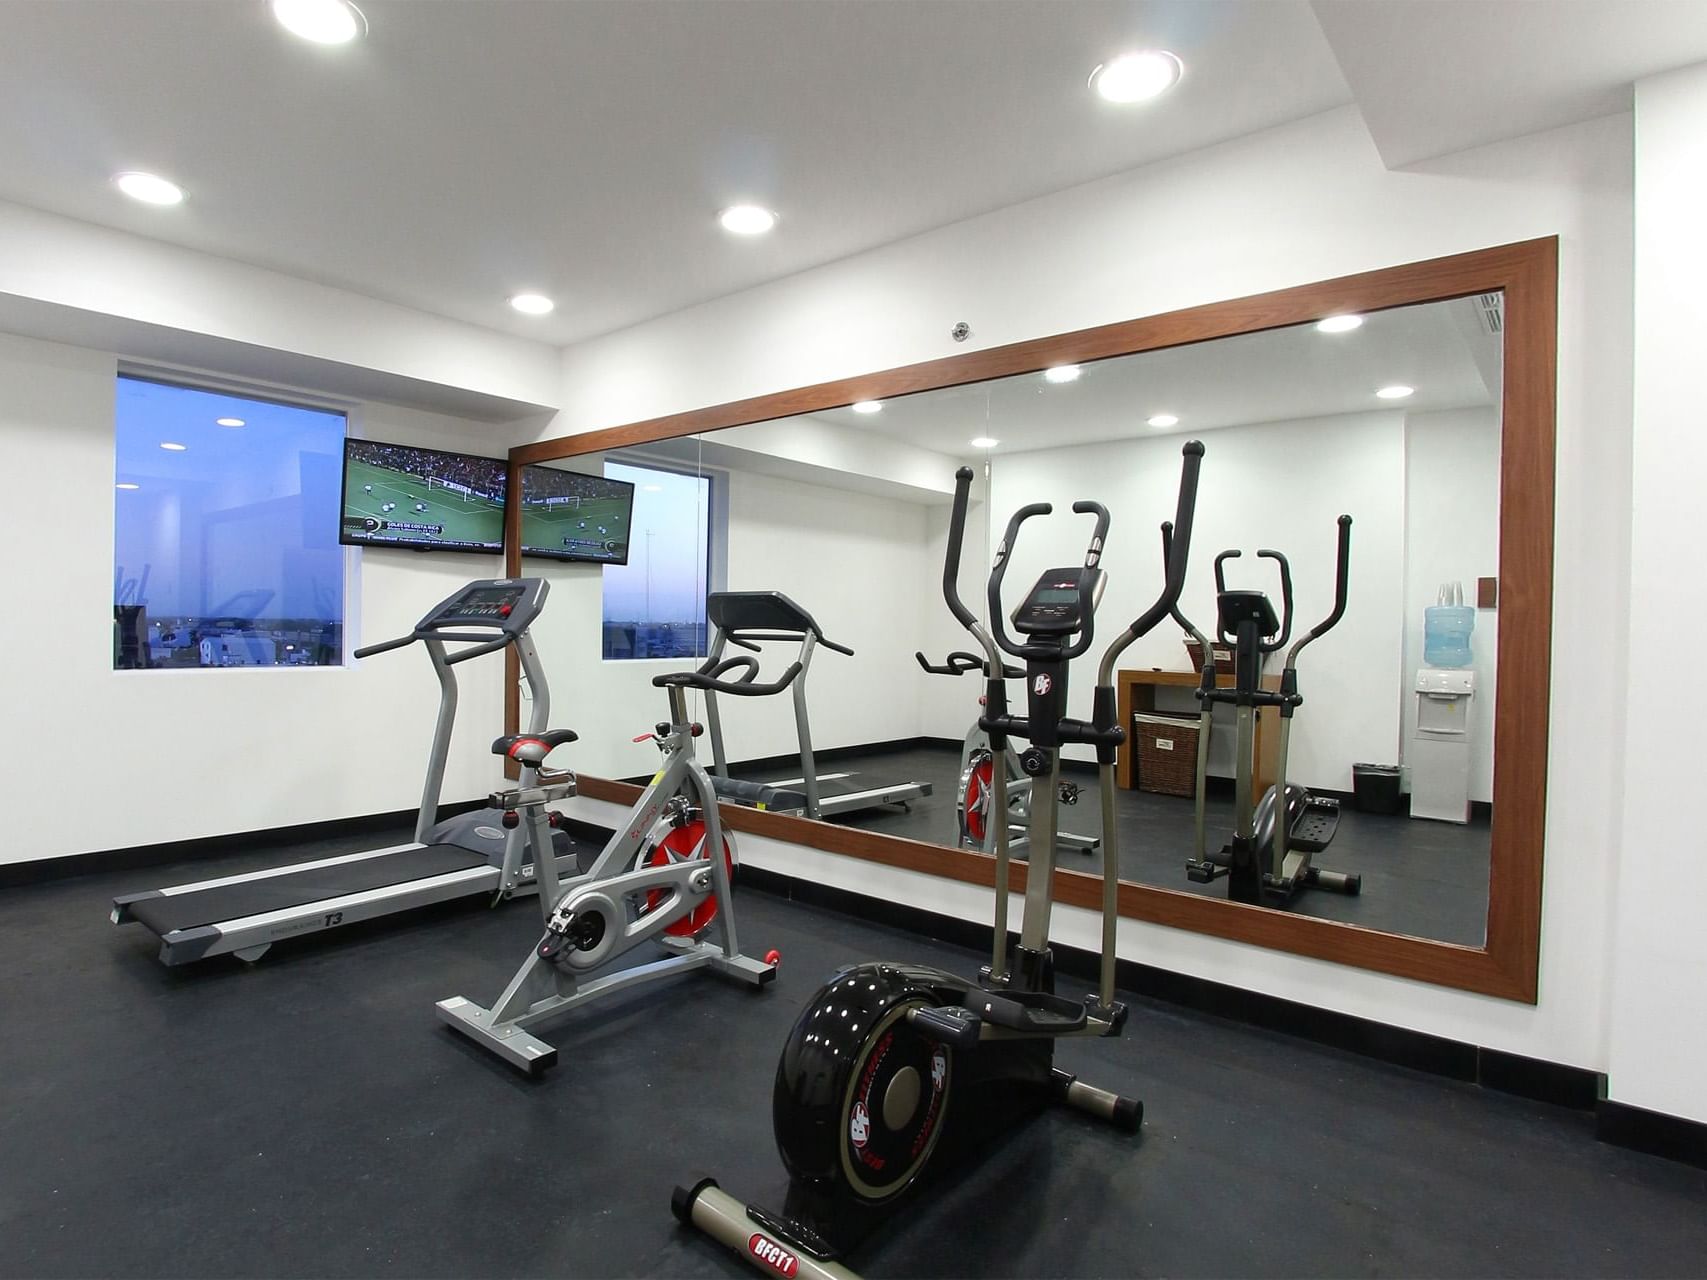 Exercise machines facing a big wall mirror in a gym, One Hotels